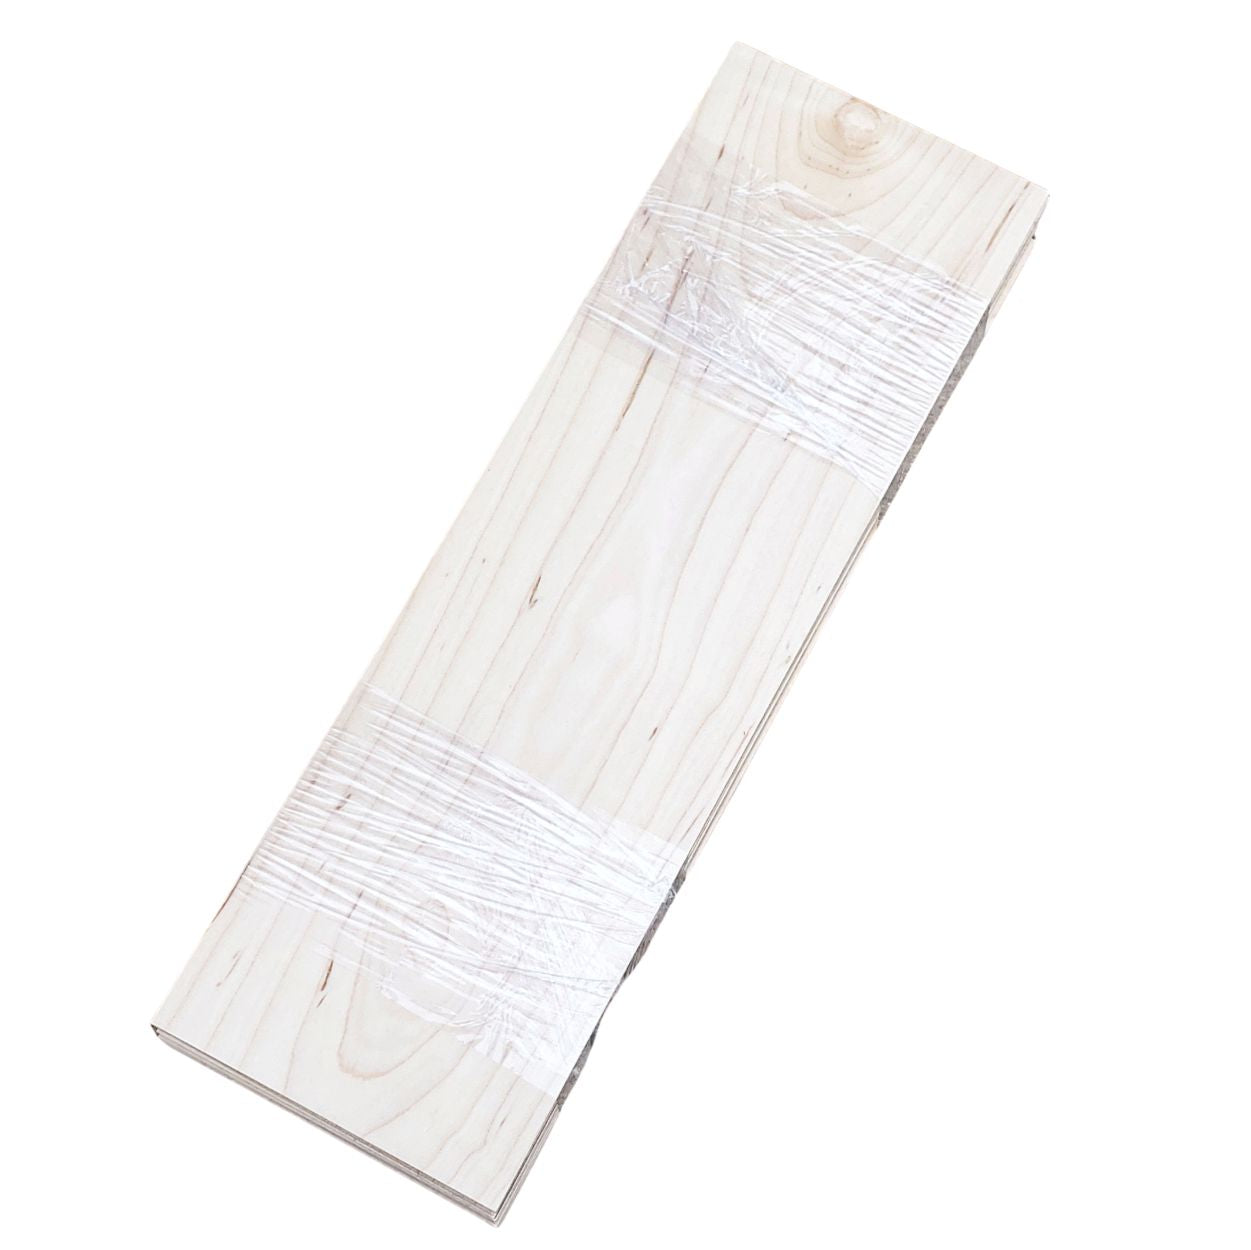 American Cherry Wood Strips, 1/8 Thick 4 x 30 Pack of 7 - wood4engraving